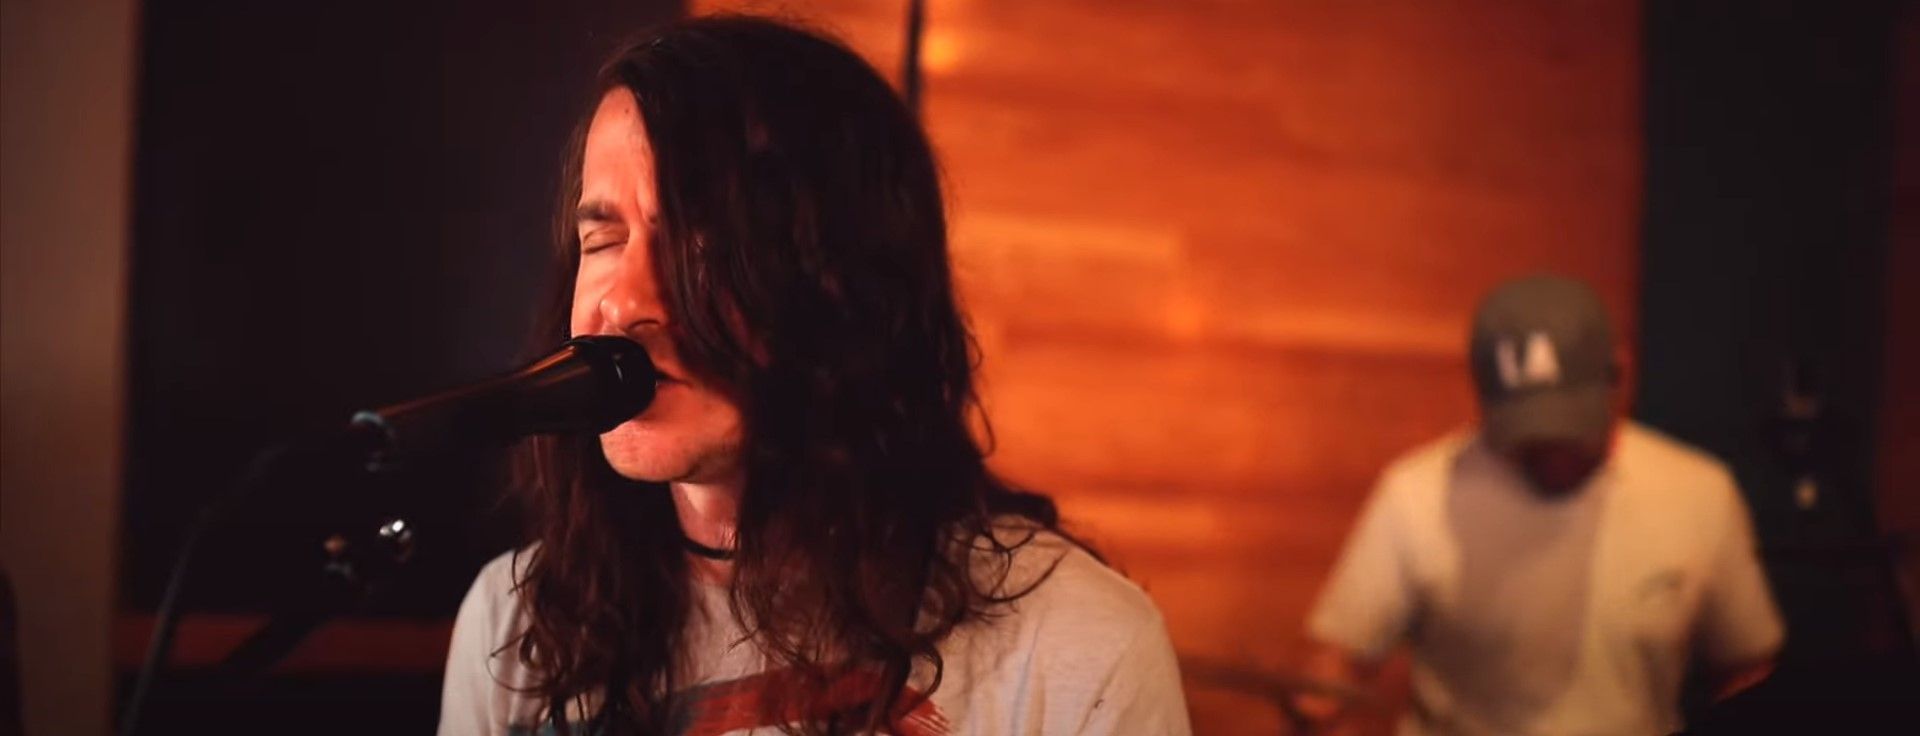 Mayday Parade - Lighten Up Kid (Acoustic Live In Studio 2020)